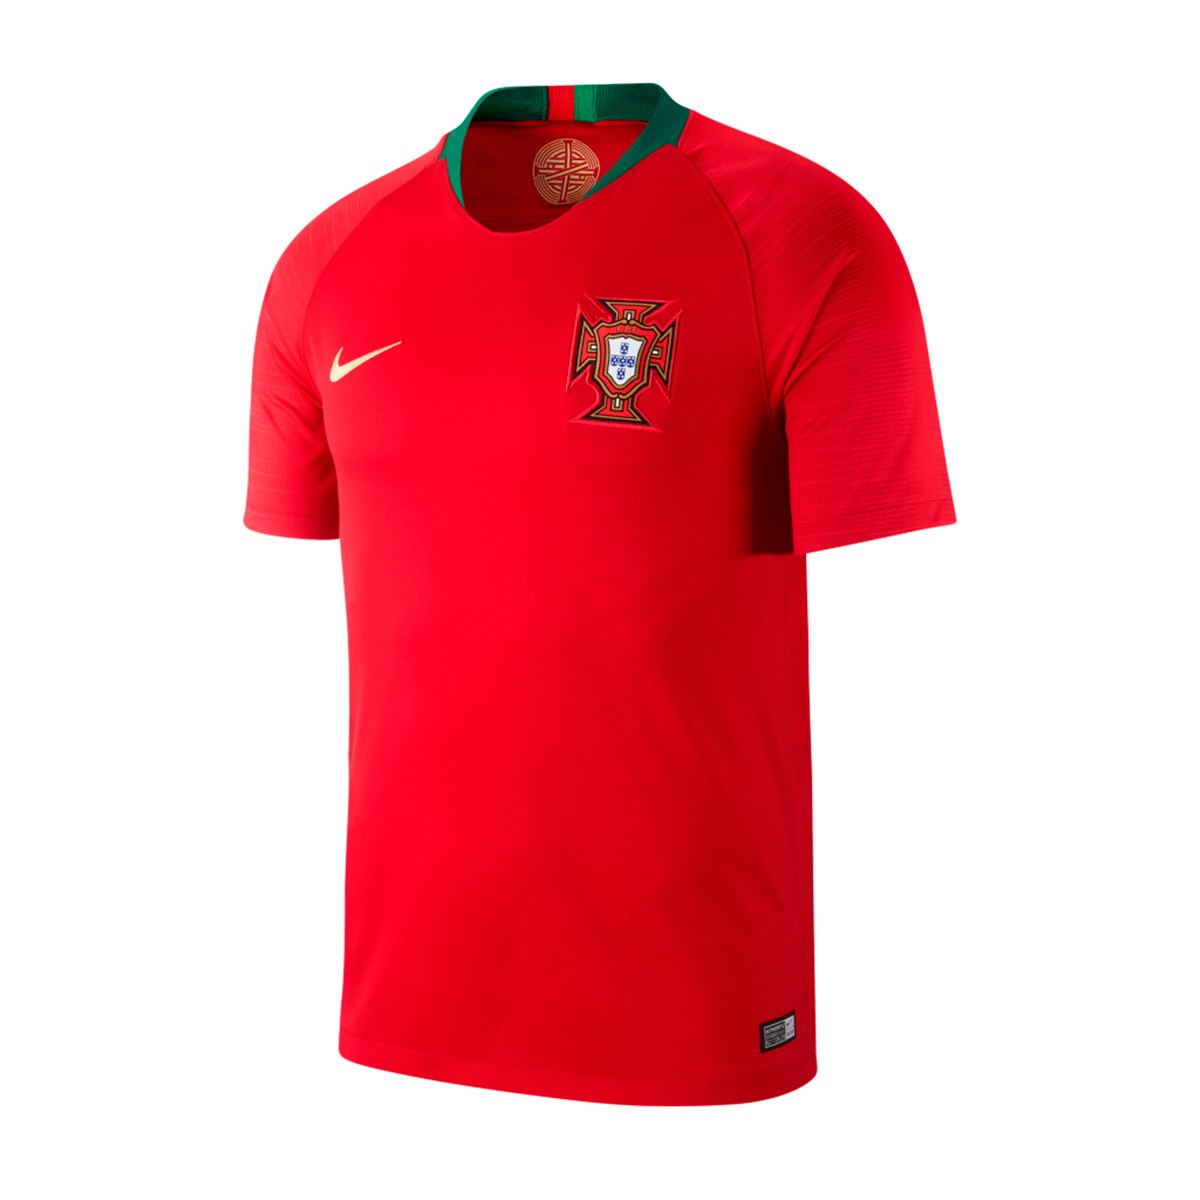 create your own soccer jersey nike